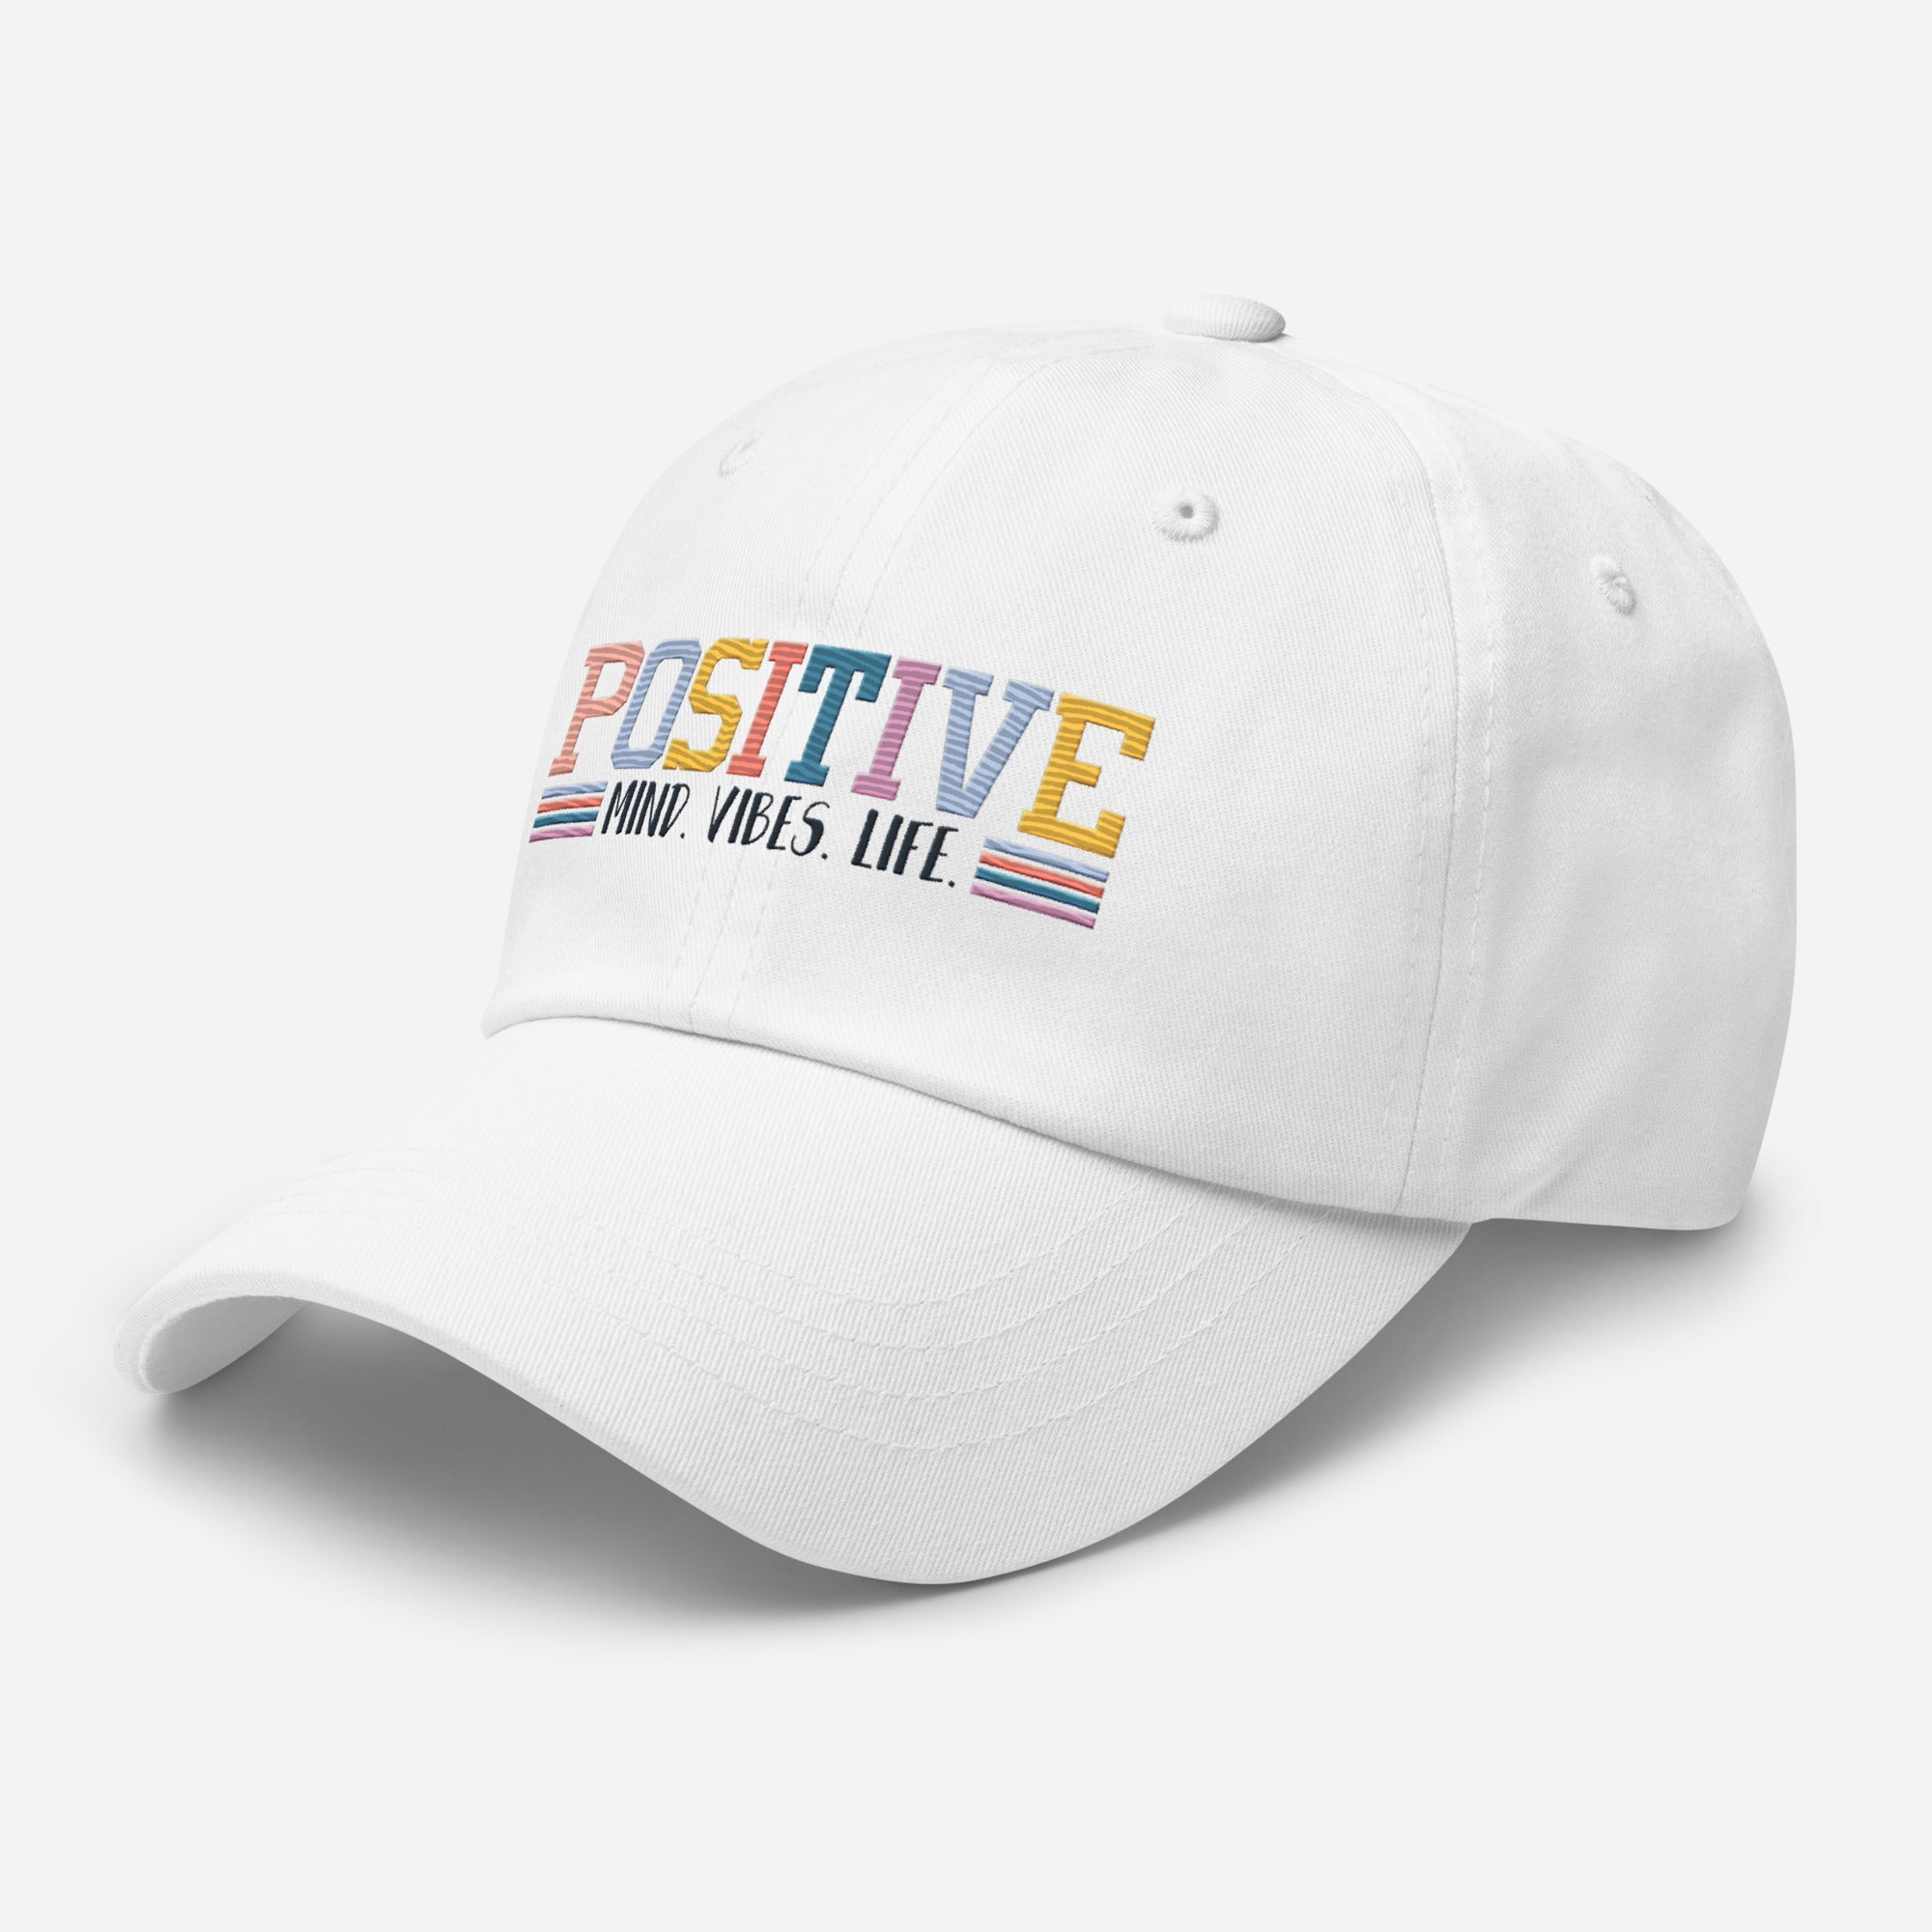 Positive Mind Vibes Life Embroidered Dad Hat - The Kindness Cause